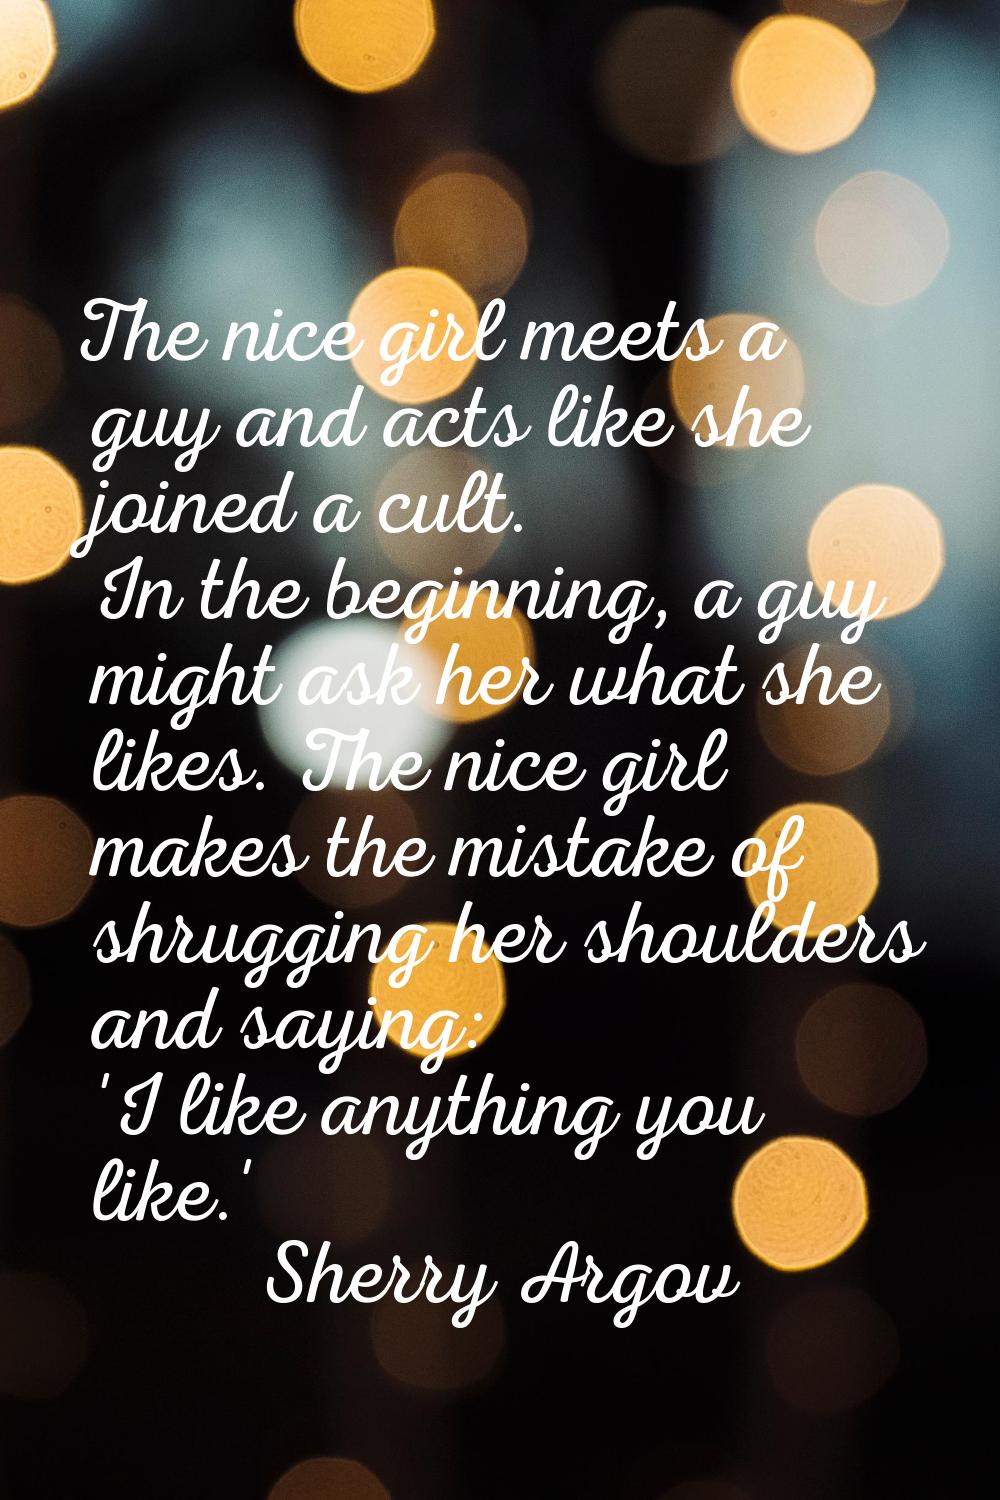 The nice girl meets a guy and acts like she joined a cult. In the beginning, a guy might ask her wh